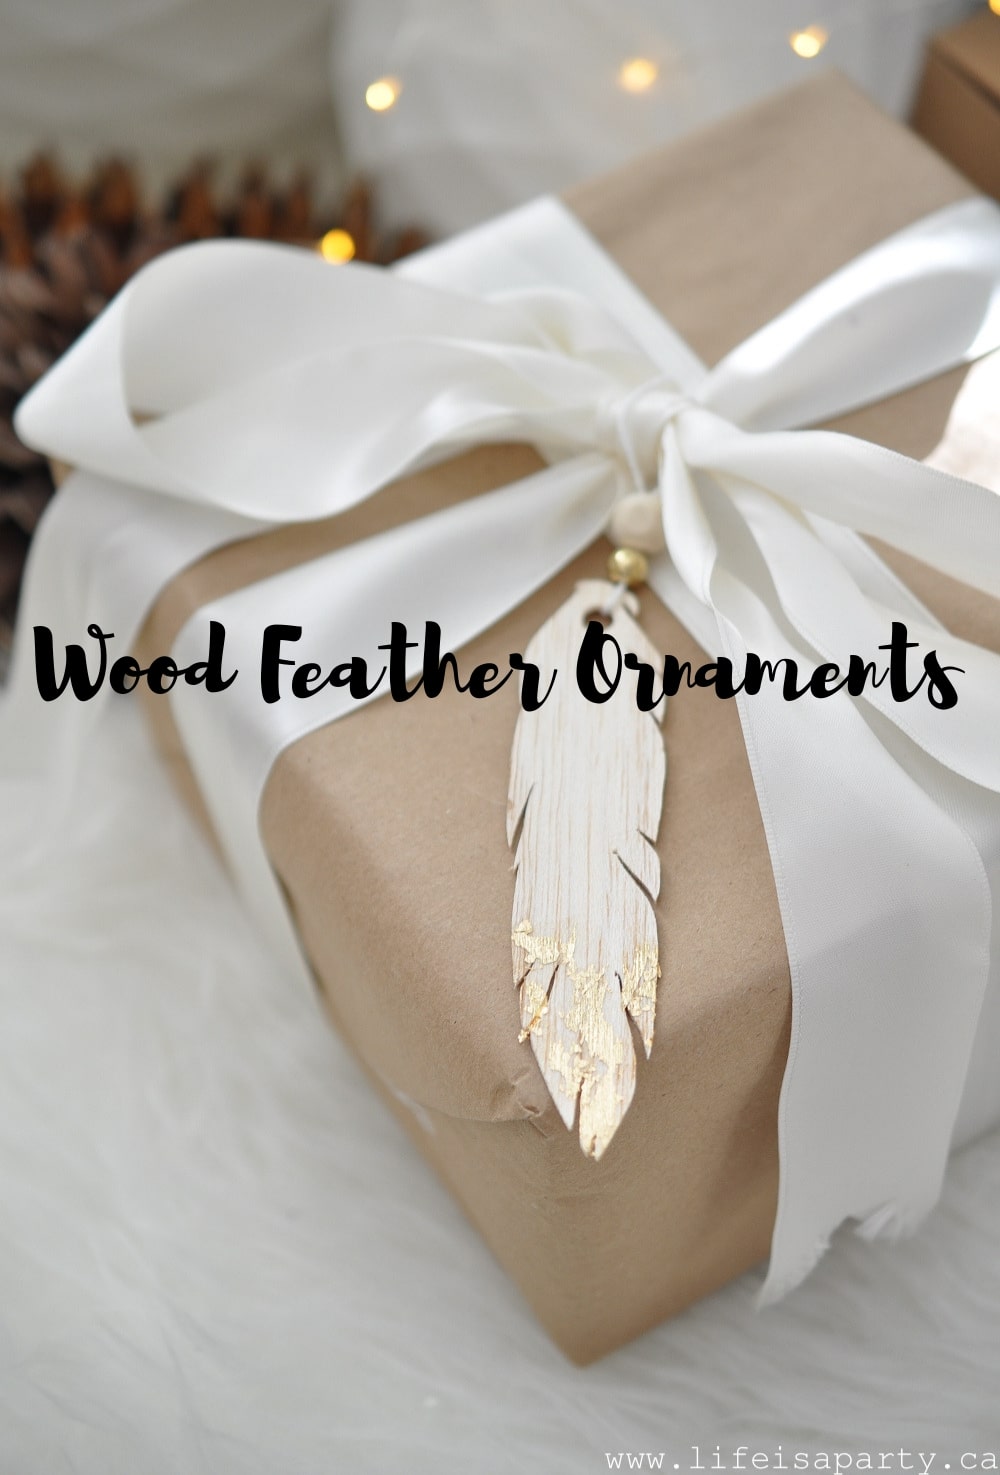 Cricut Wood Feather Ornament: see how to cut wood using your Cricut machine. Includes a free cut file for this wood feather Christmas ornament.